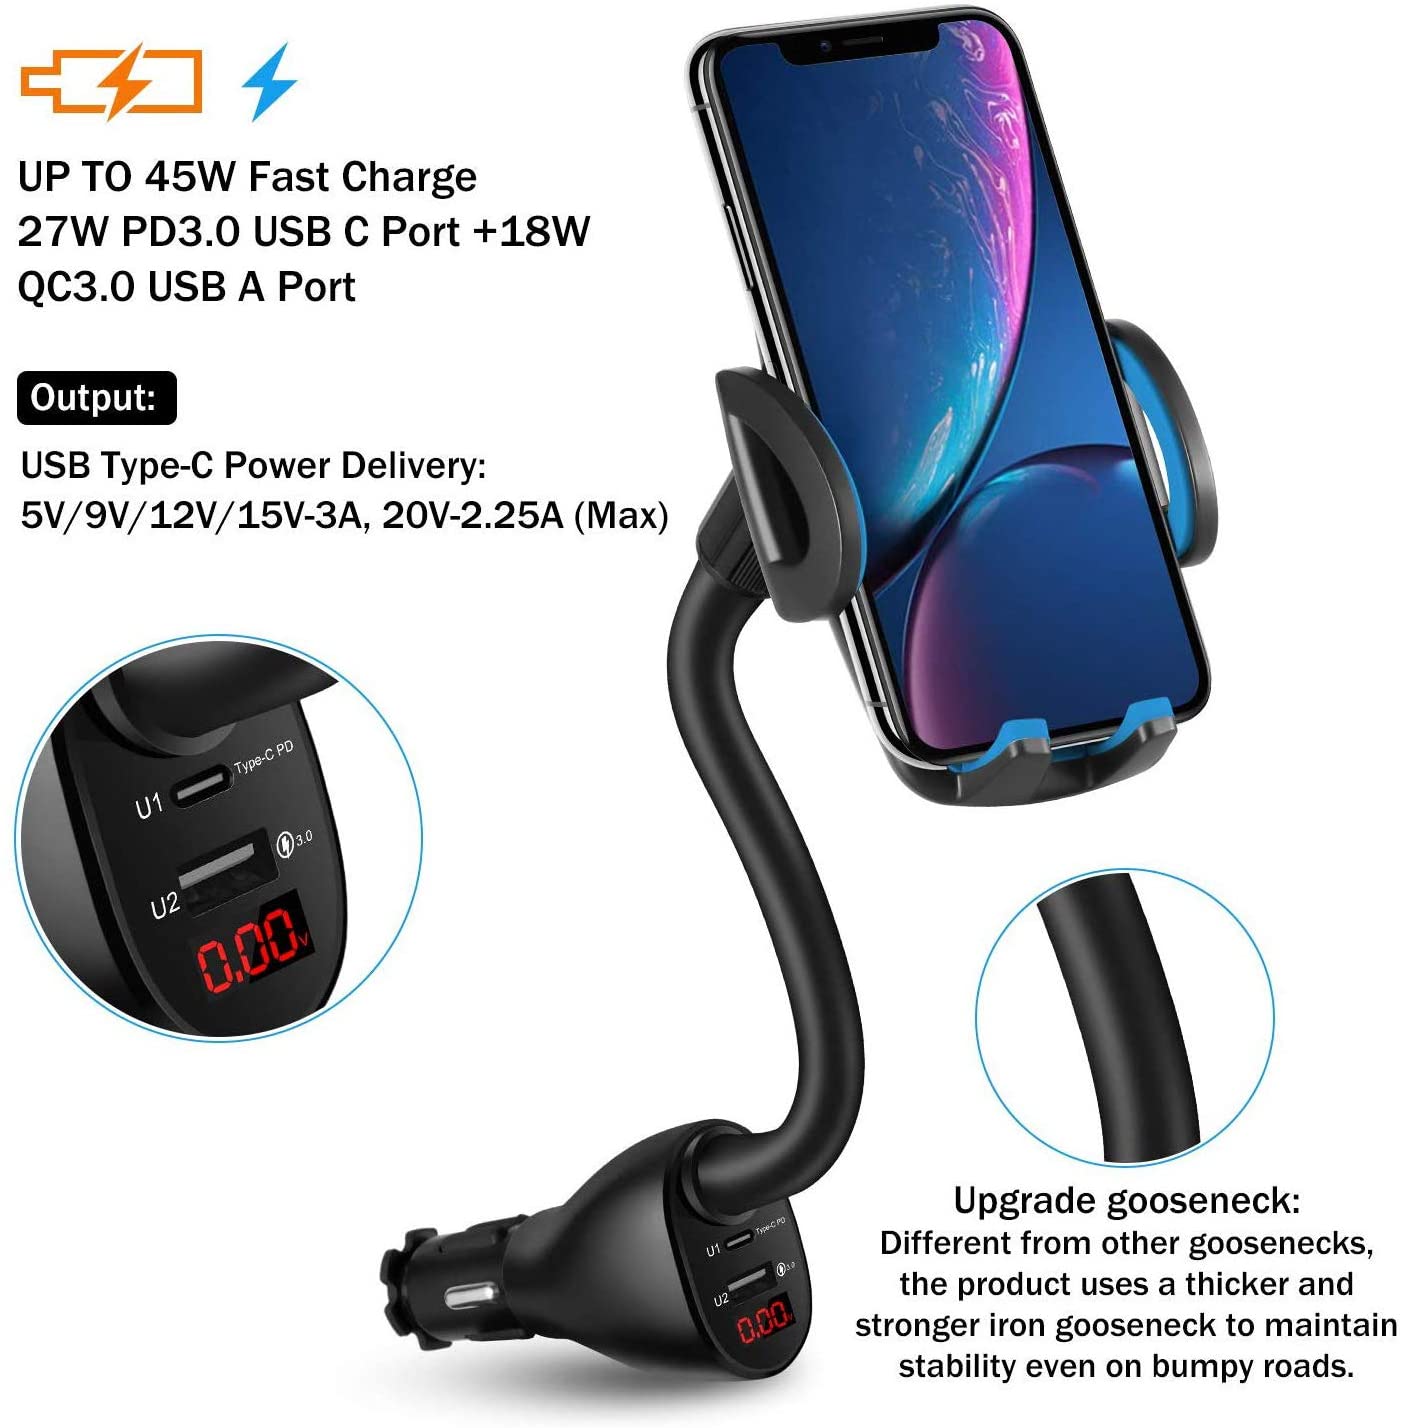 USB C PD Car Cigarette Lighter Phone Mount,WALOTAR Fast Car Charger Dual Port 45W Power Delivery (27W USB Type C +QC3.0) with Voltage Detector,Adjustable Universal Cell Phone Cradle Holder